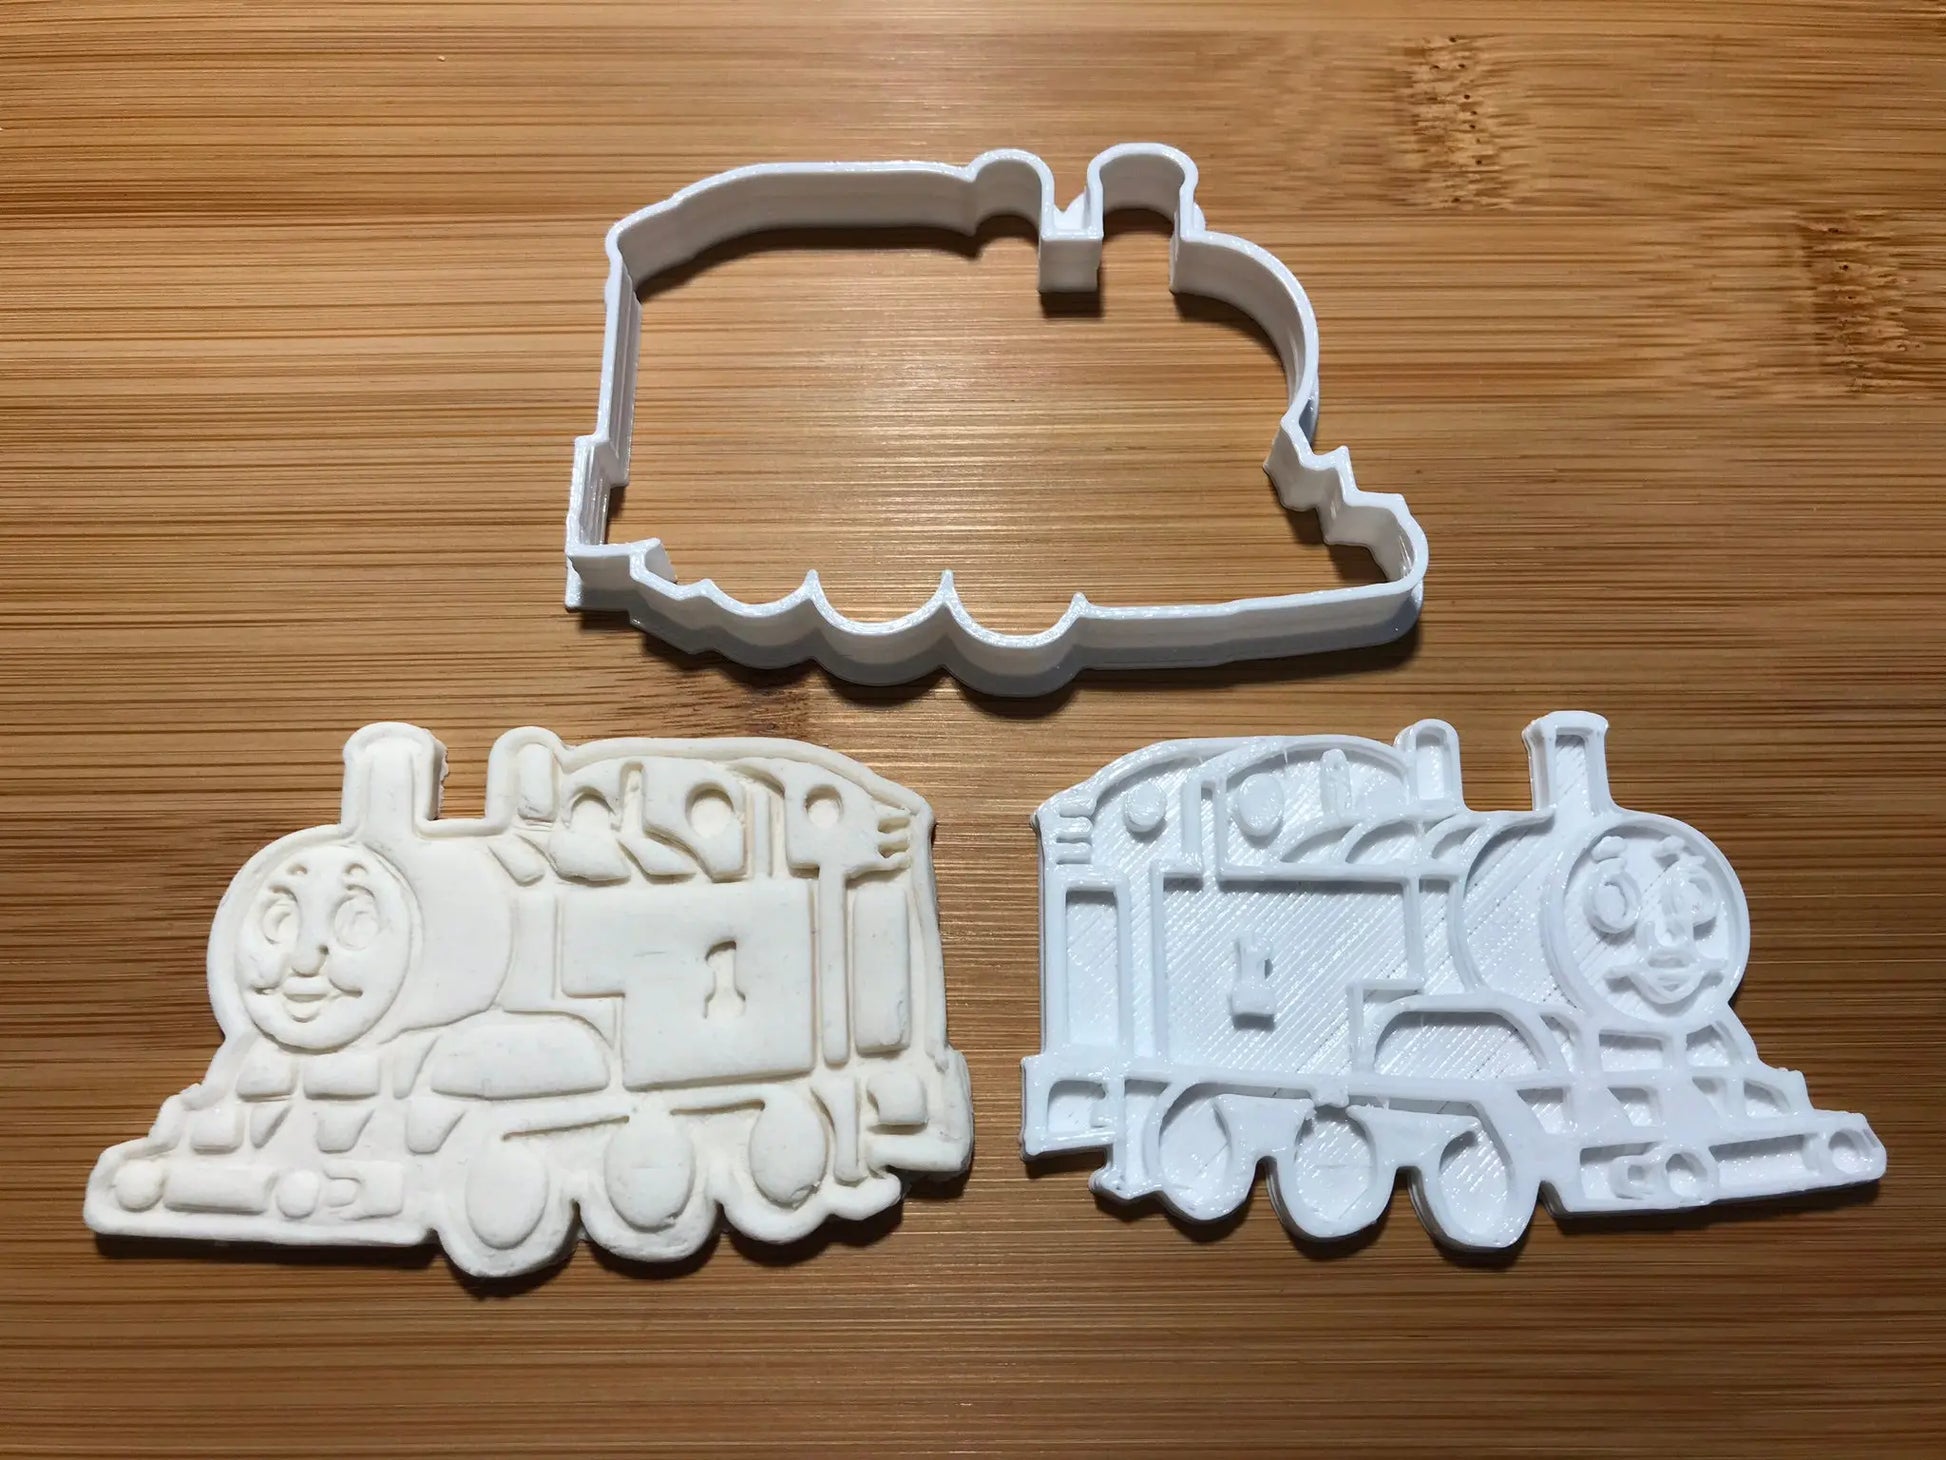 Thomas The Train Cookie Cutter Topper Fondant Cake Decoration - uk Seller MEG cookie cutters